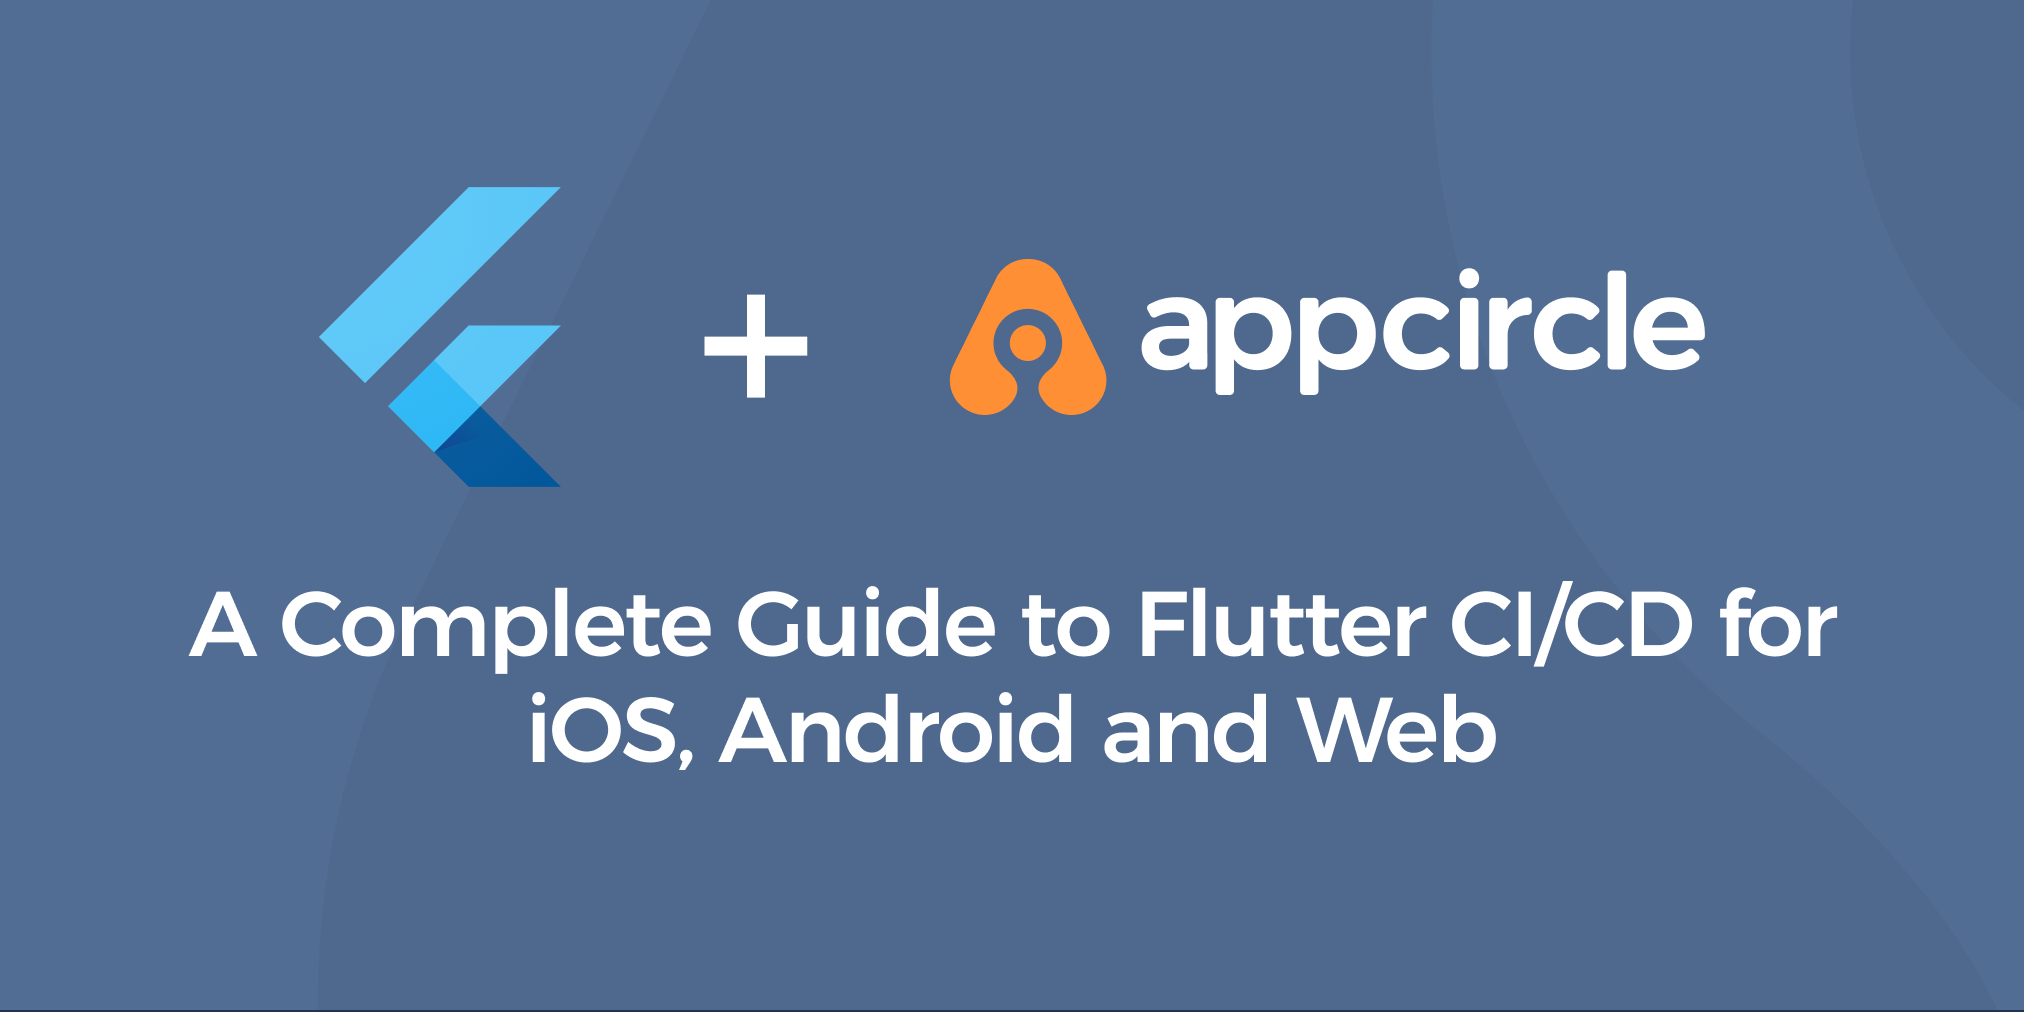 A Complete Guide to Flutter CI/CD for iOS, Android and Web